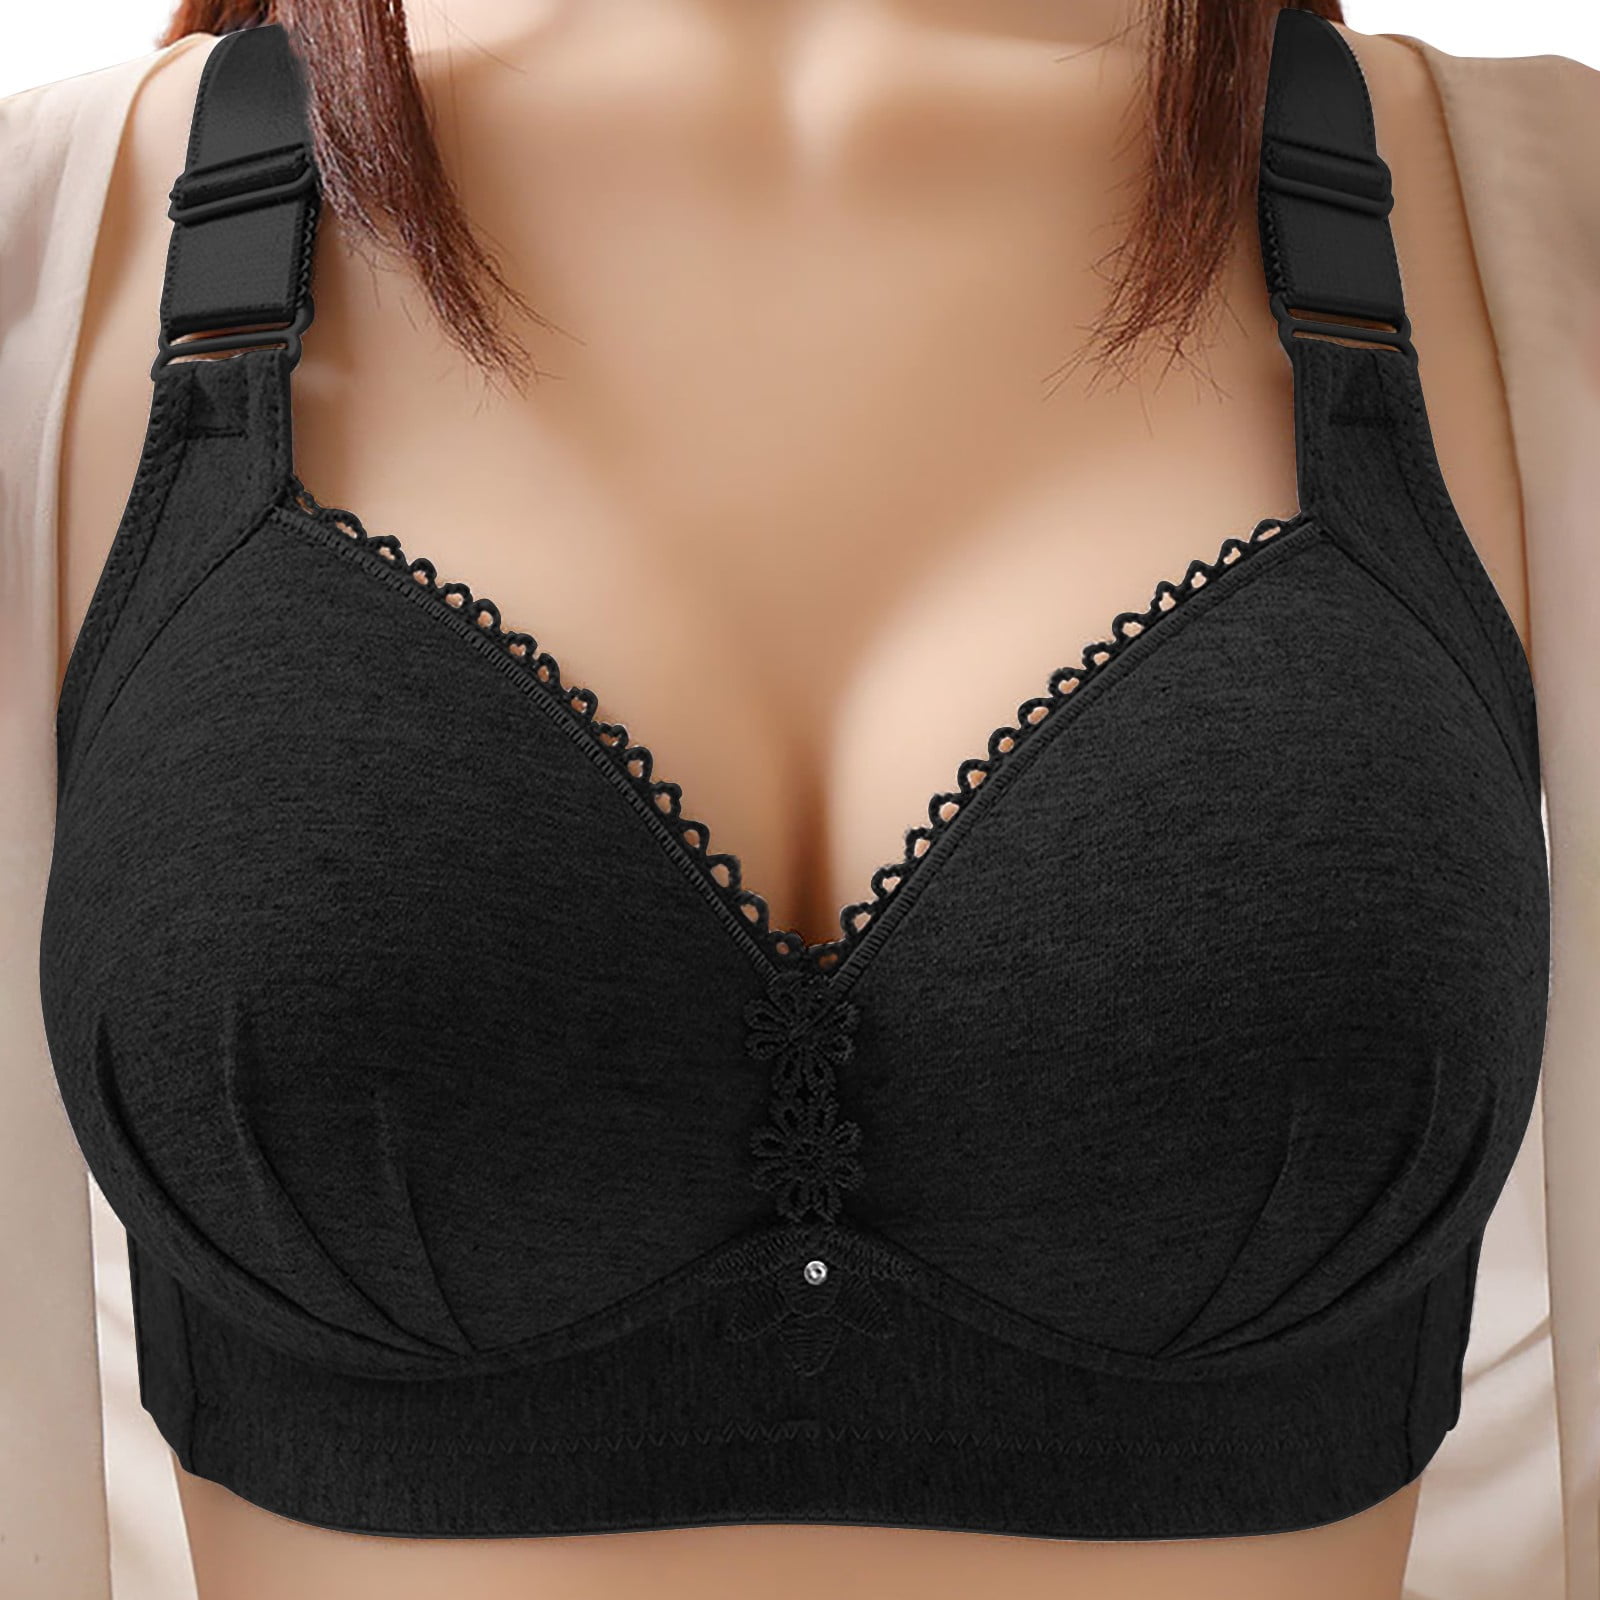 Womens Adjustable Lace Back Button Shoulder Strap Large Size Athletic Bras  For Older Women With Sexy Shaping Cup, No Underwire Padding From Shulasi,  $11.44